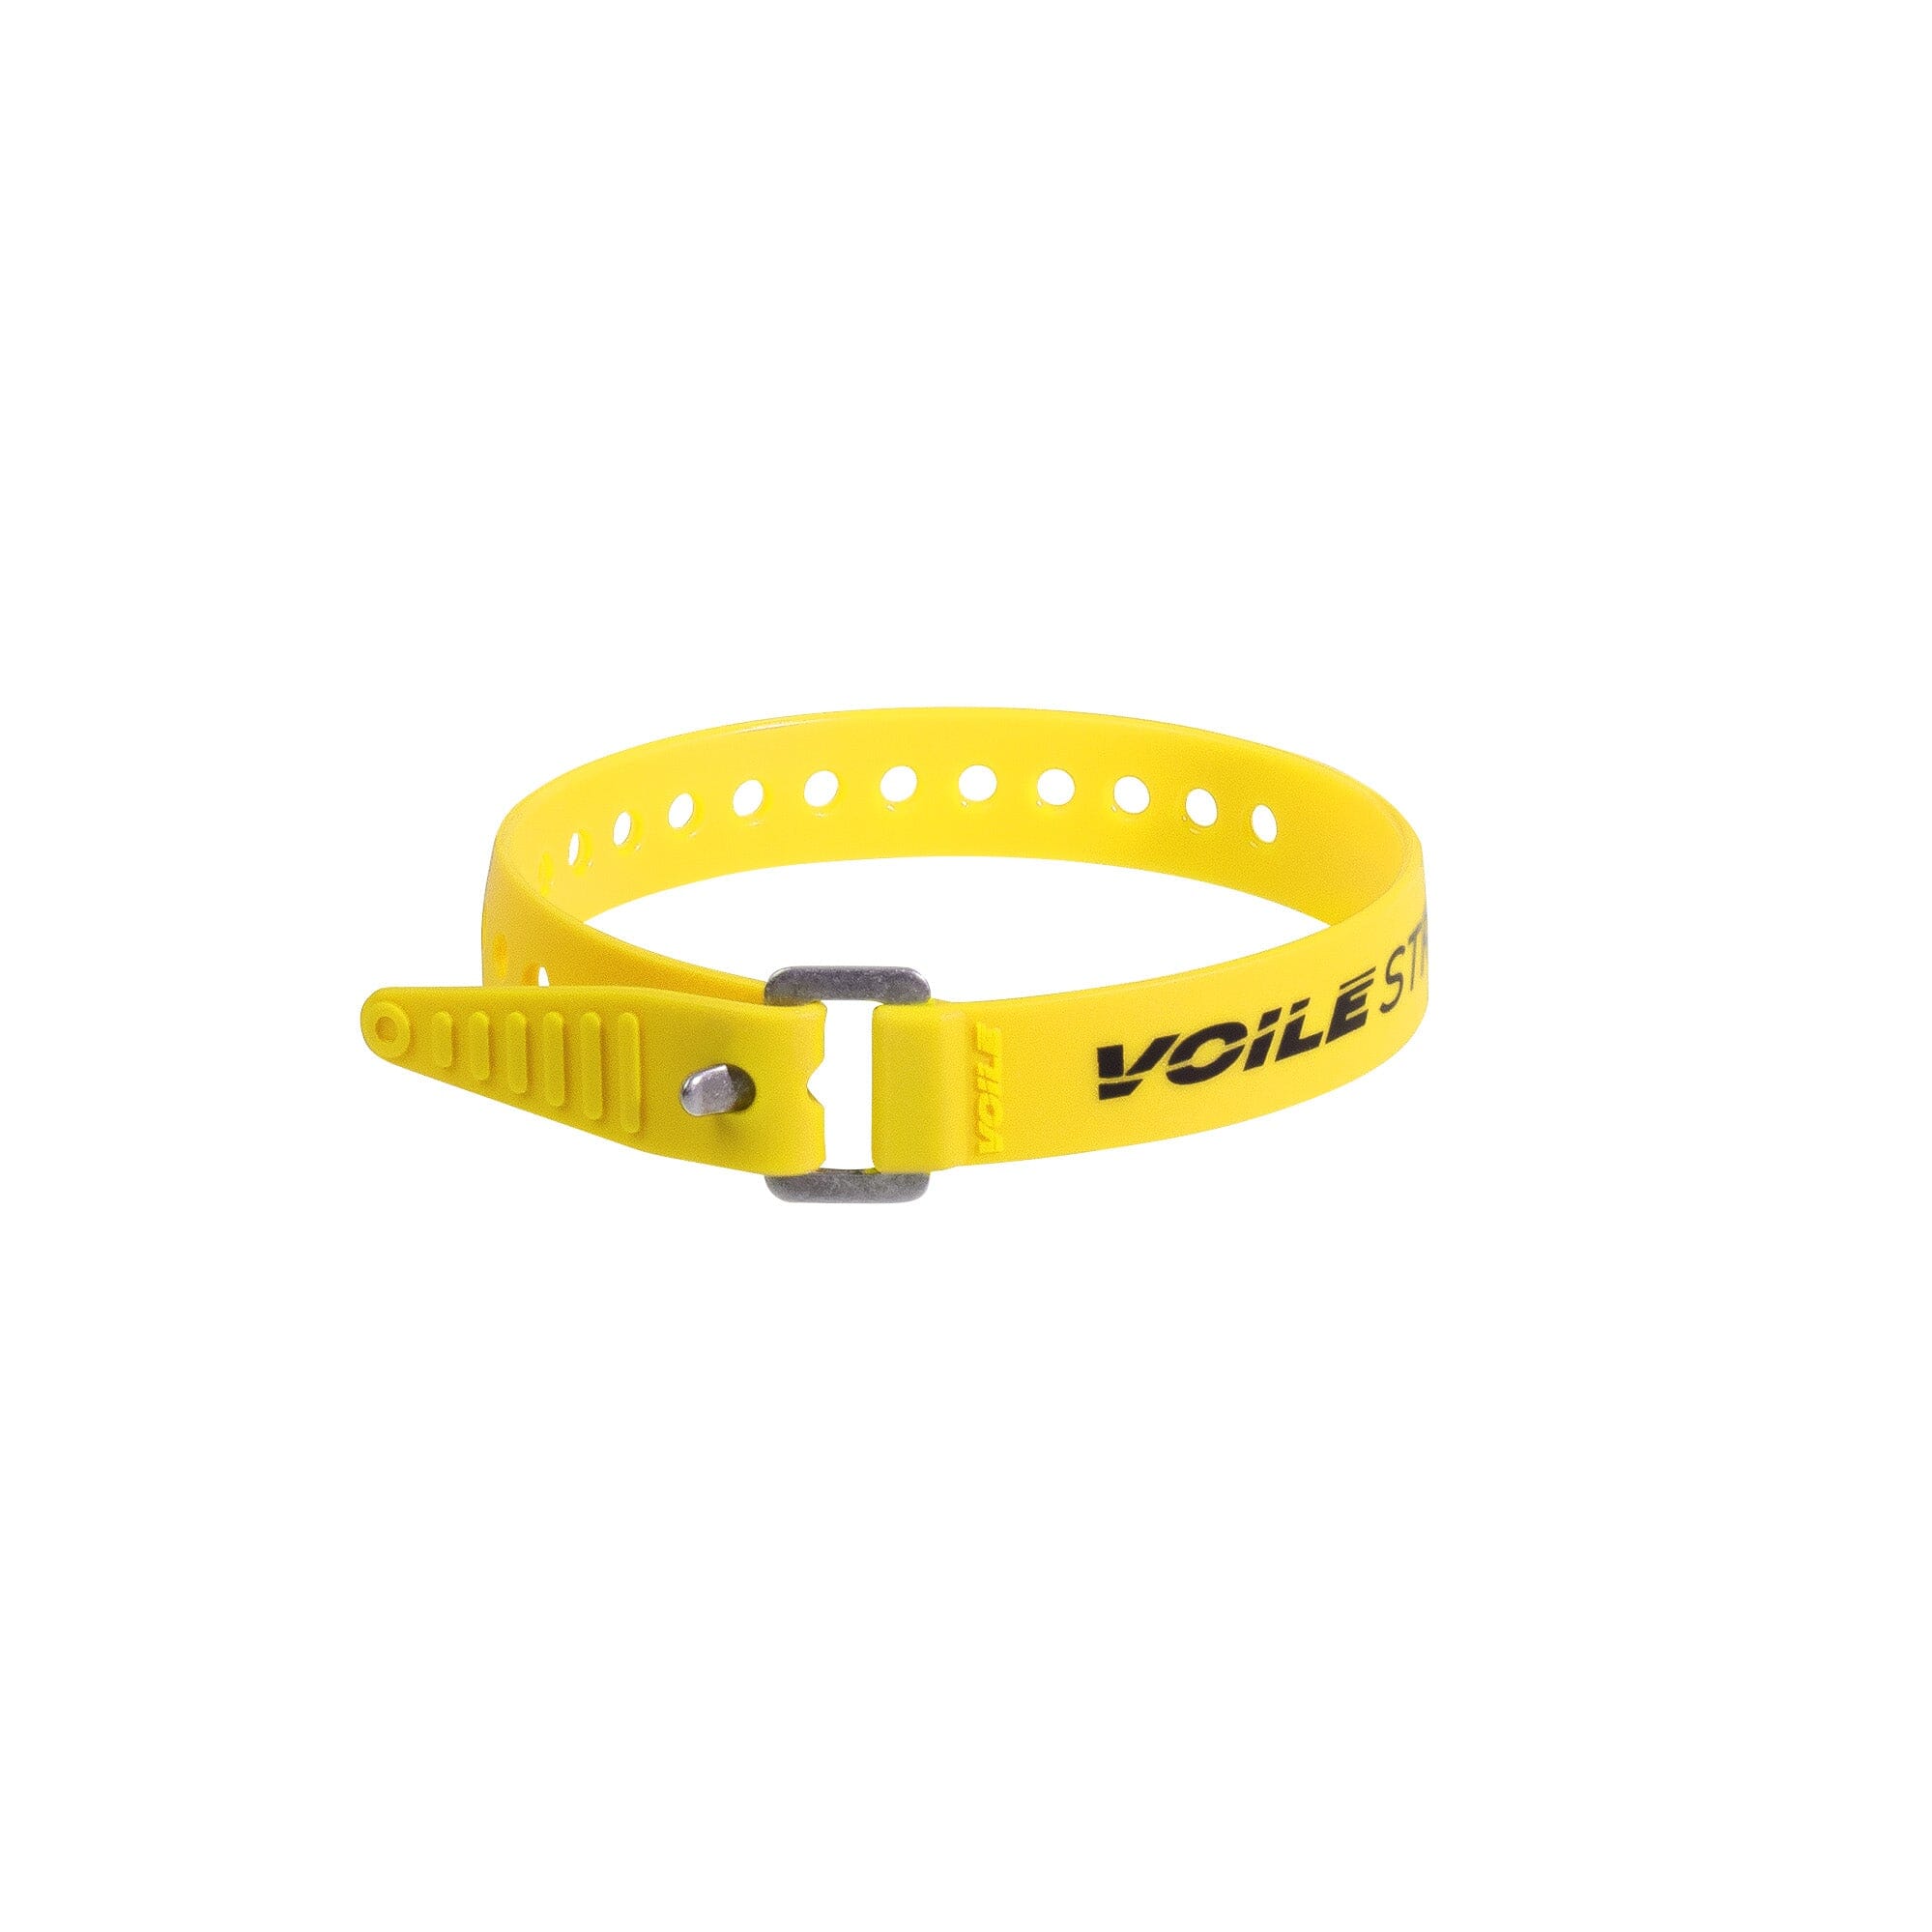 Voile Strap Aluminium Buckle BIKE STRAPS Melbourne Powered Electric Bikes 15 inch Yellow 